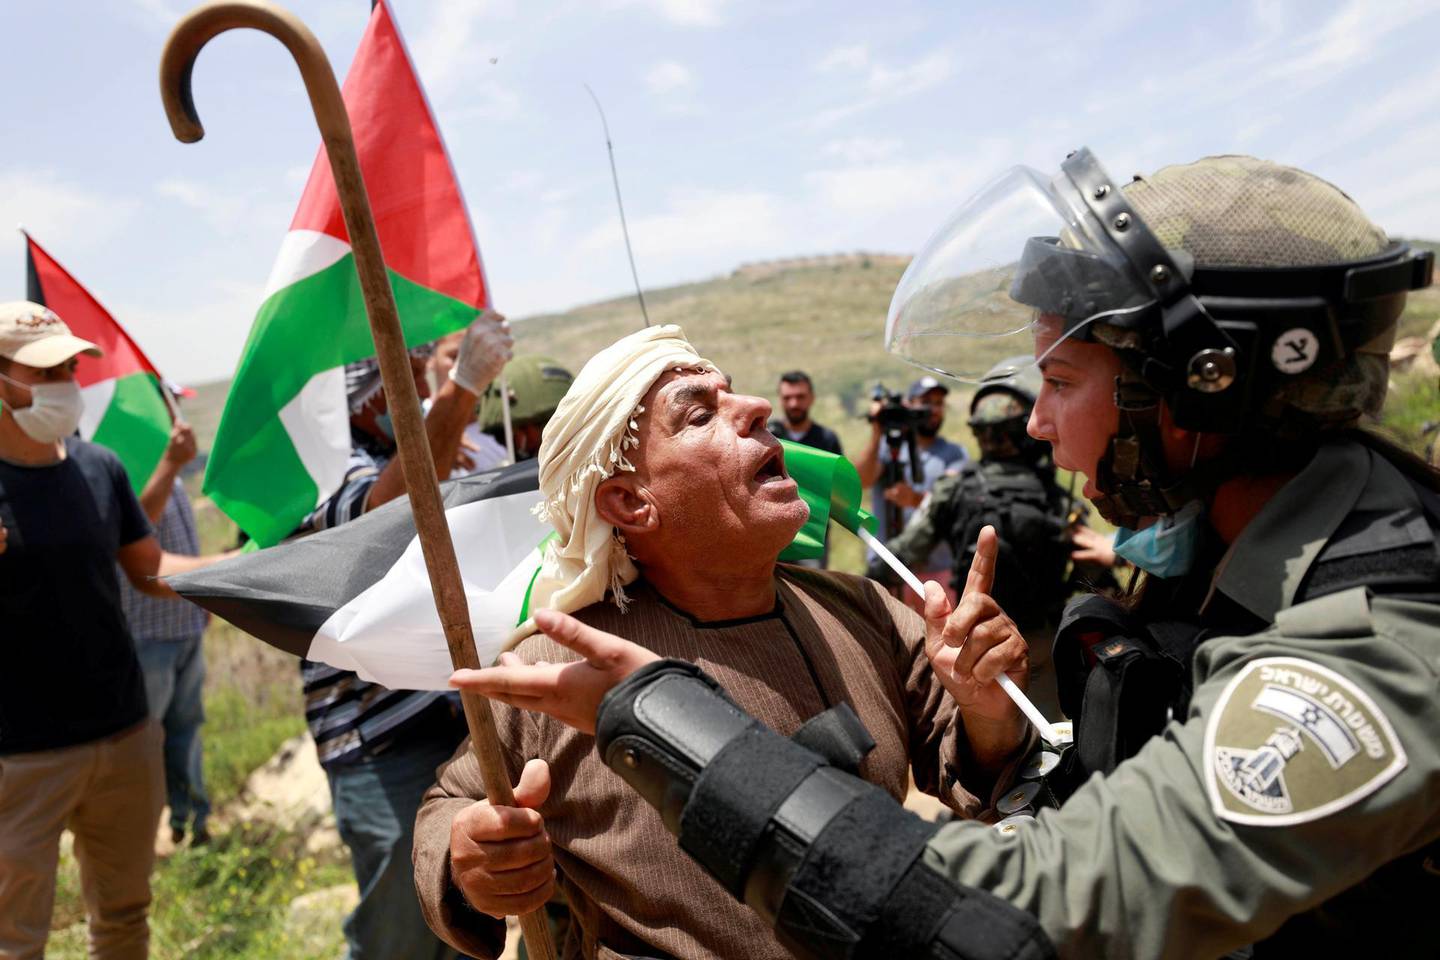 A Palestinian man argues with an Israeli border policewoman during a protest marking the 72nd anniversary of Nakba and against Israeli plan to annex parts of the occupied West Bank, in the village of Sawiya near Nablus in the Israeli-occupied West Bank May 15, 2020. REUTERS/Mohamad Torokman     TPX IMAGES OF THE DAY